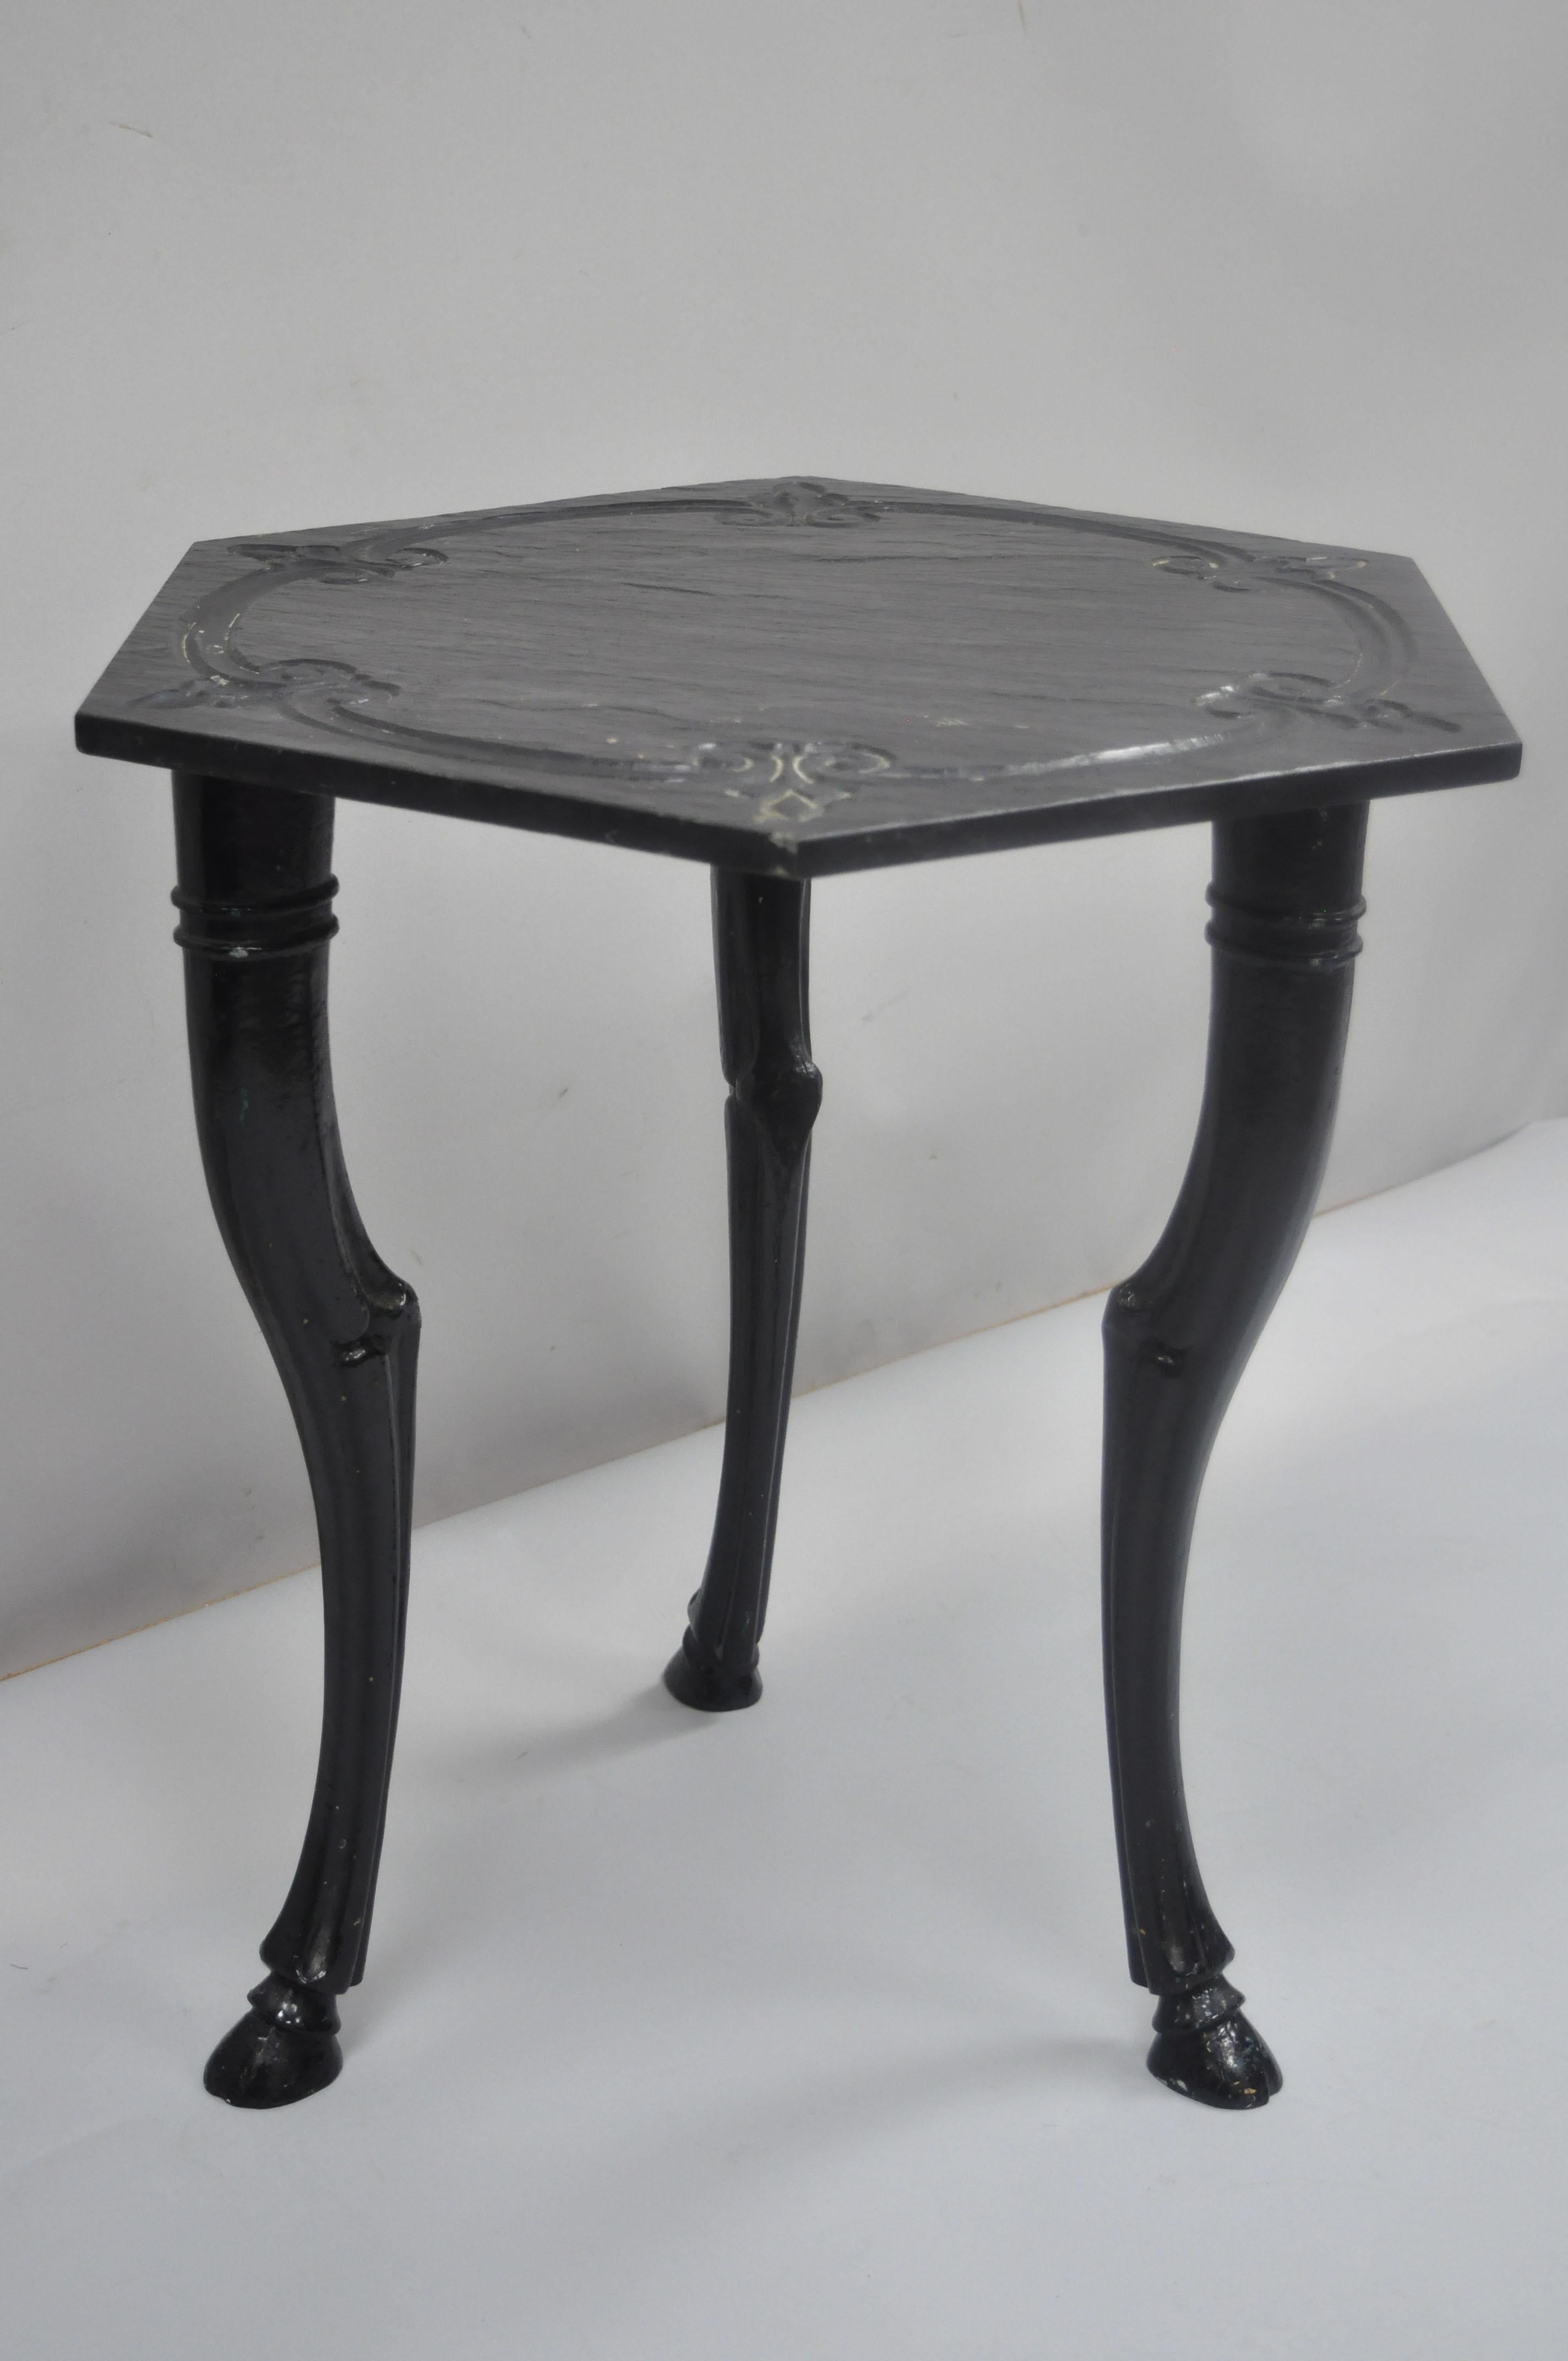 Vintage cast iron hoof foot French Regency style black slate top tripod side table. Item features heavy iron tripod hoof foot base, carved slate top (not attached), quality craftsmanship, great style and form, circa mid-20th century. Measurements: